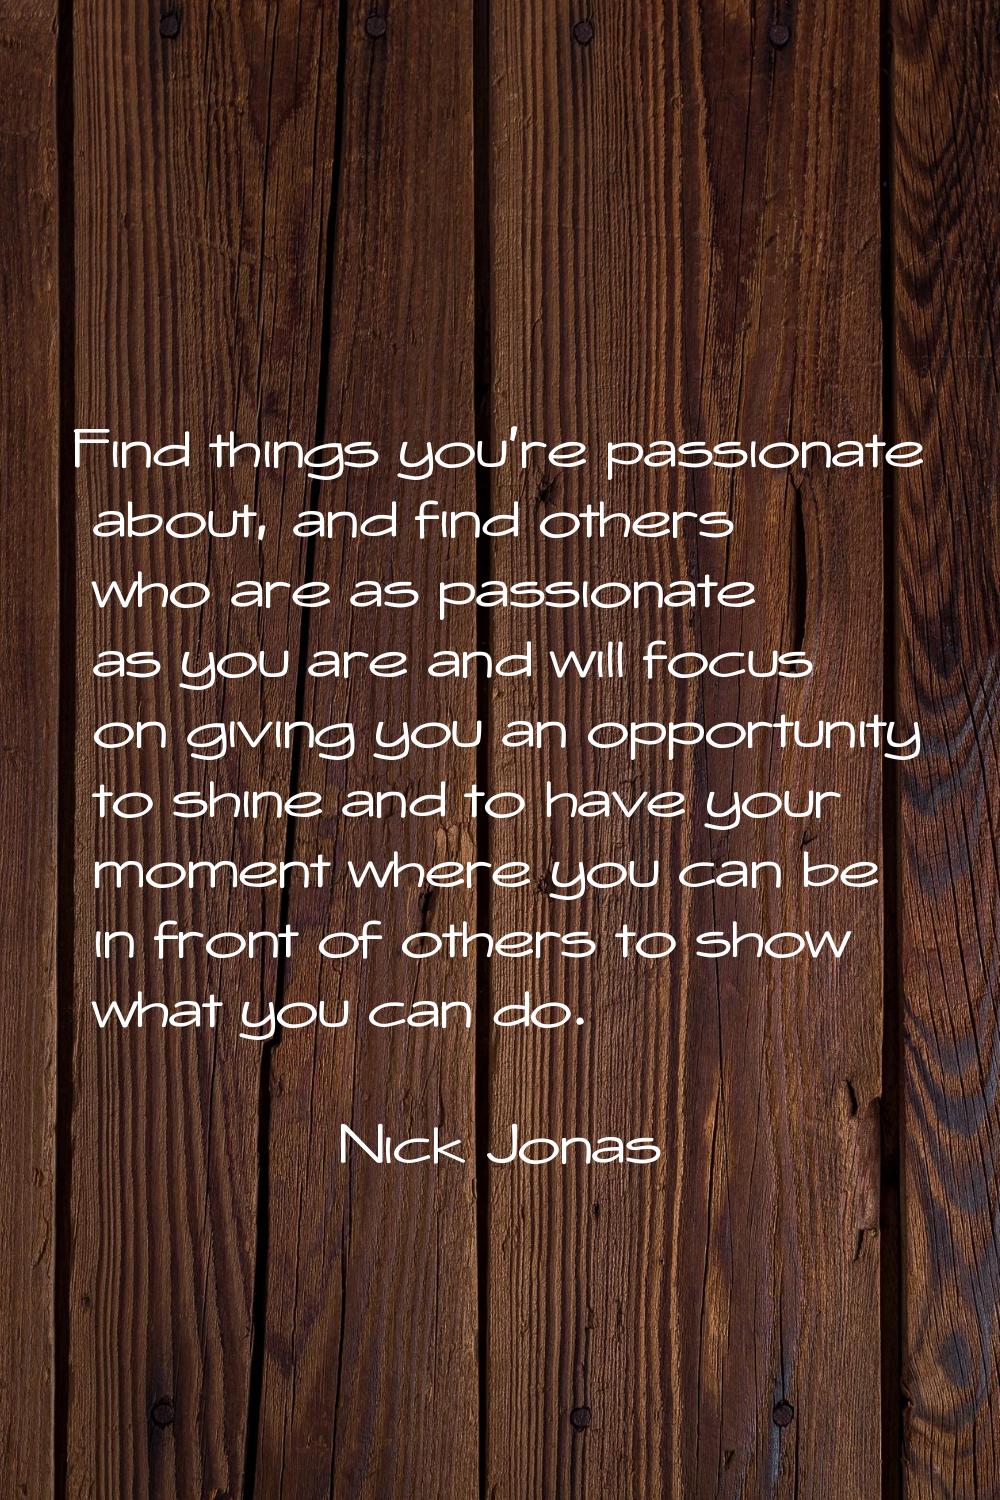 Find things you're passionate about, and find others who are as passionate as you are and will focu